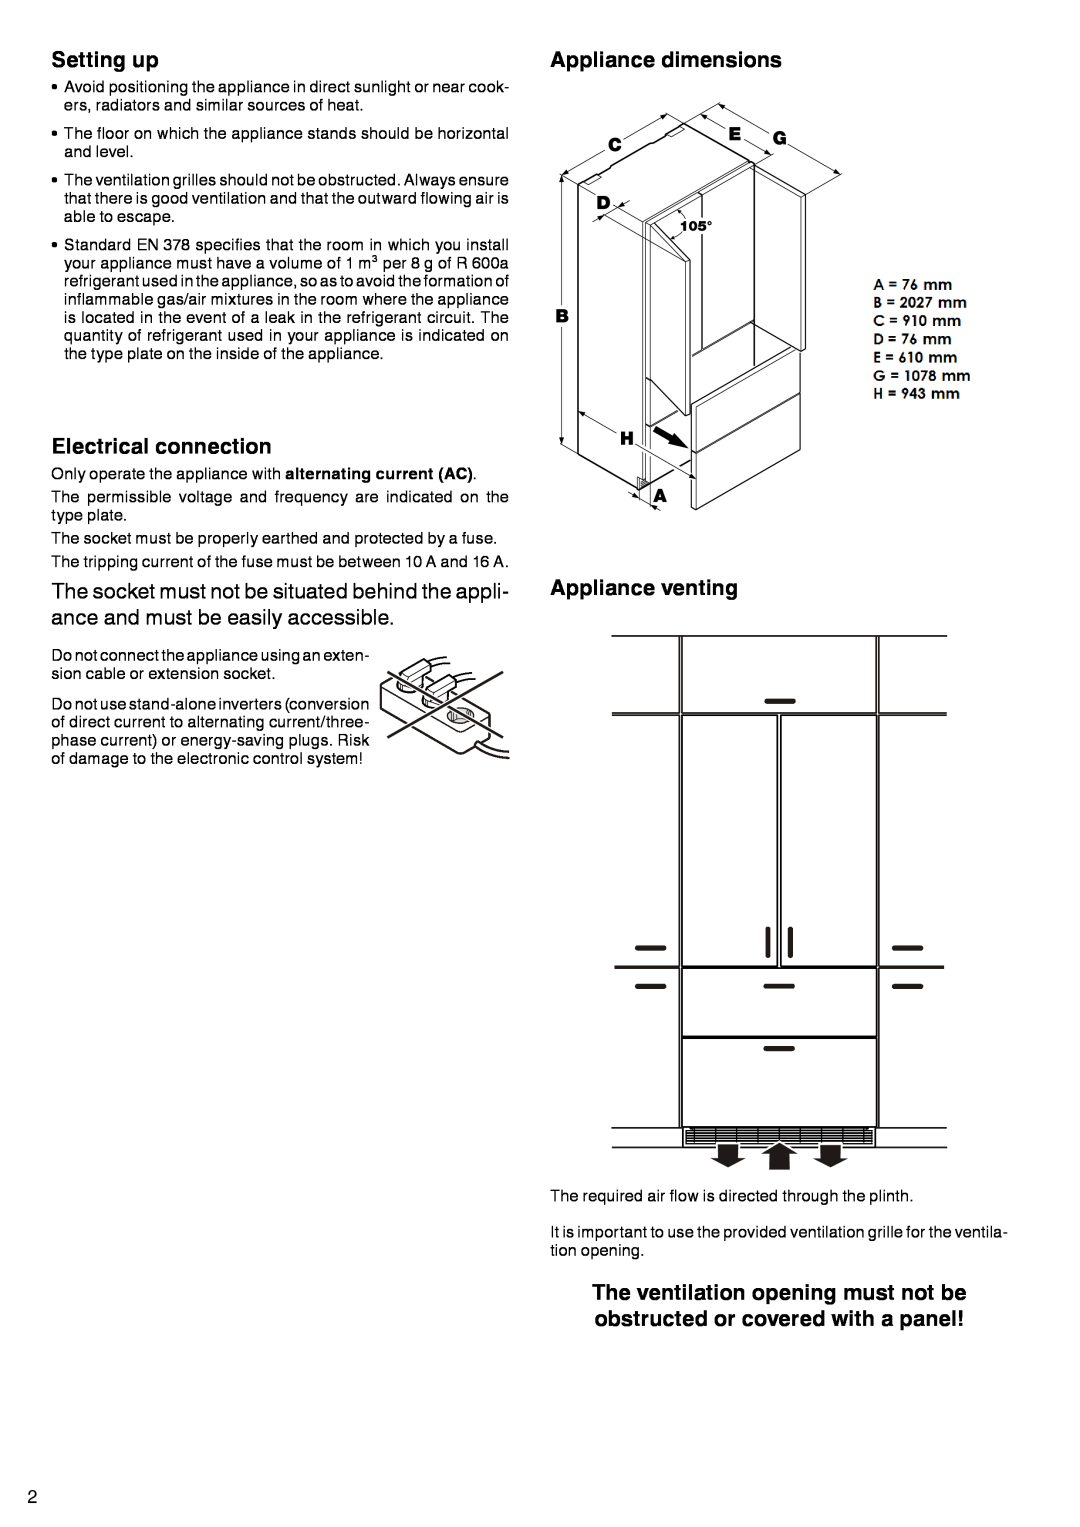 Liebherr 7083-103-00 installation instructions Setting up, Electrical connection, Appliance dimensions Appliance venting 